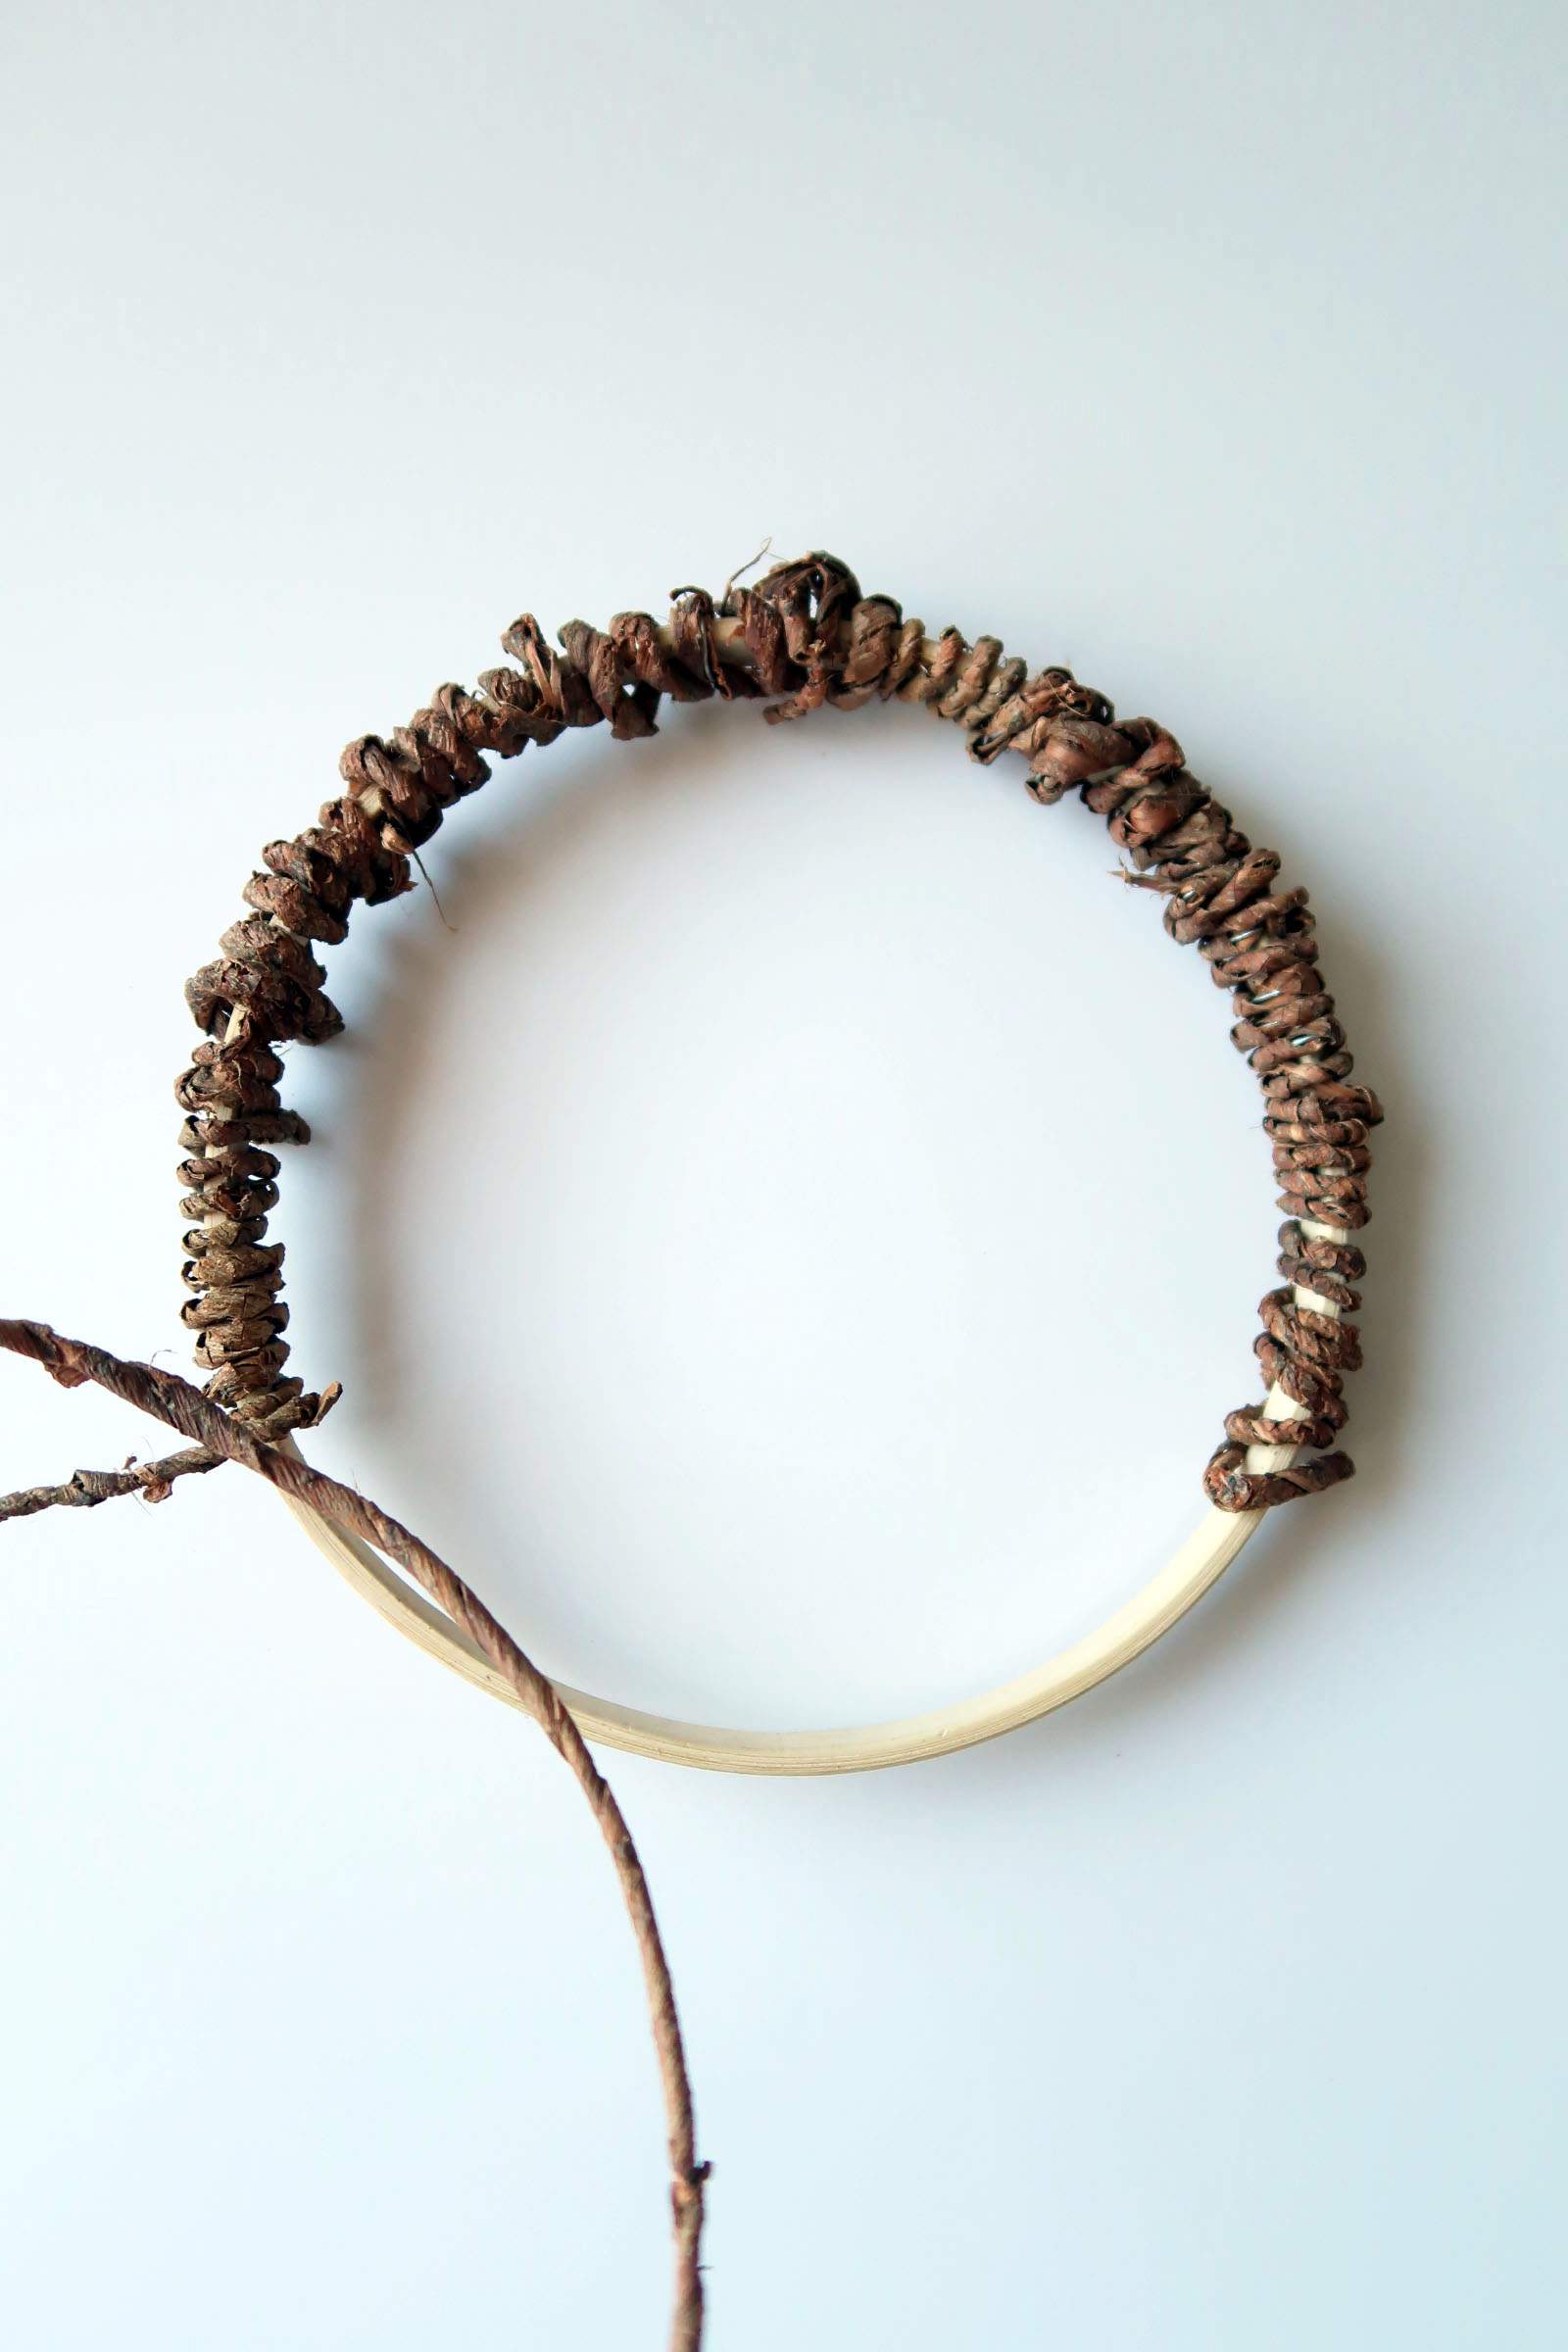 Wrap Embrodery Ring with Bark Wire